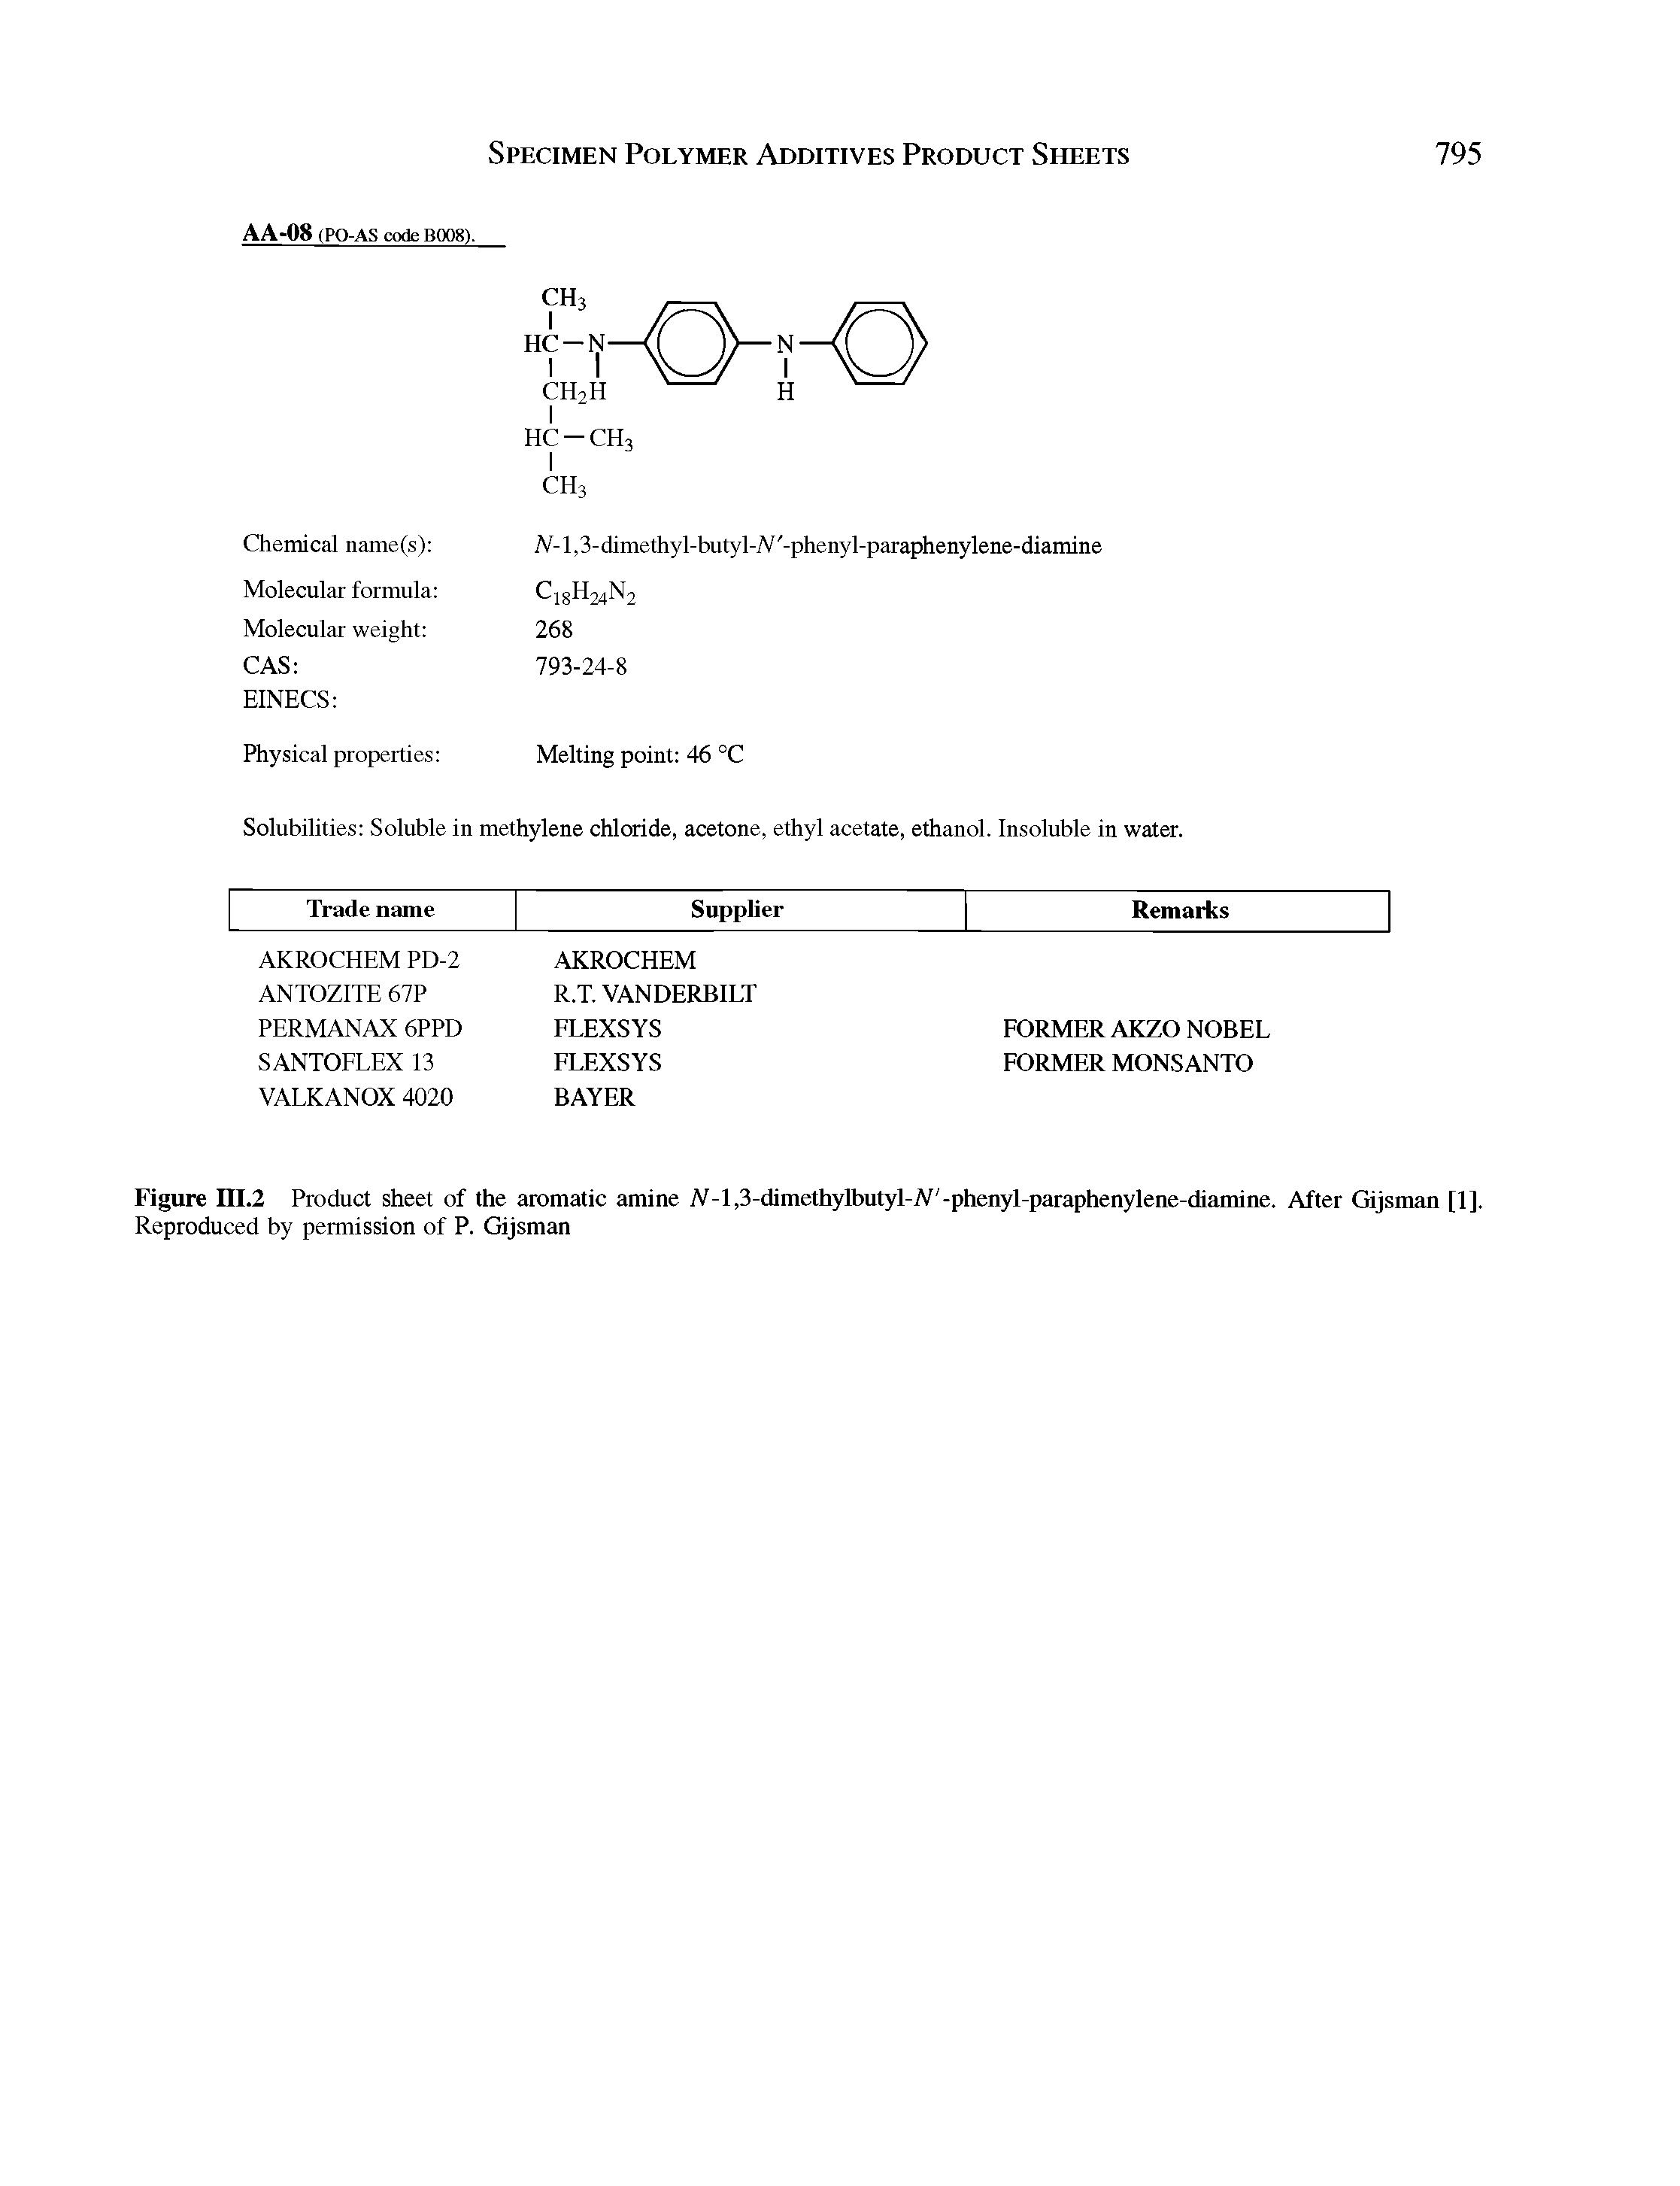 Figure III.2 Product sheet of the aromatic amine N-, 3-dimethylbutyl-/V -phenyl-paraphenylene-diamine. After Gijsman [1], Reproduced by permission of P. Gijsman...